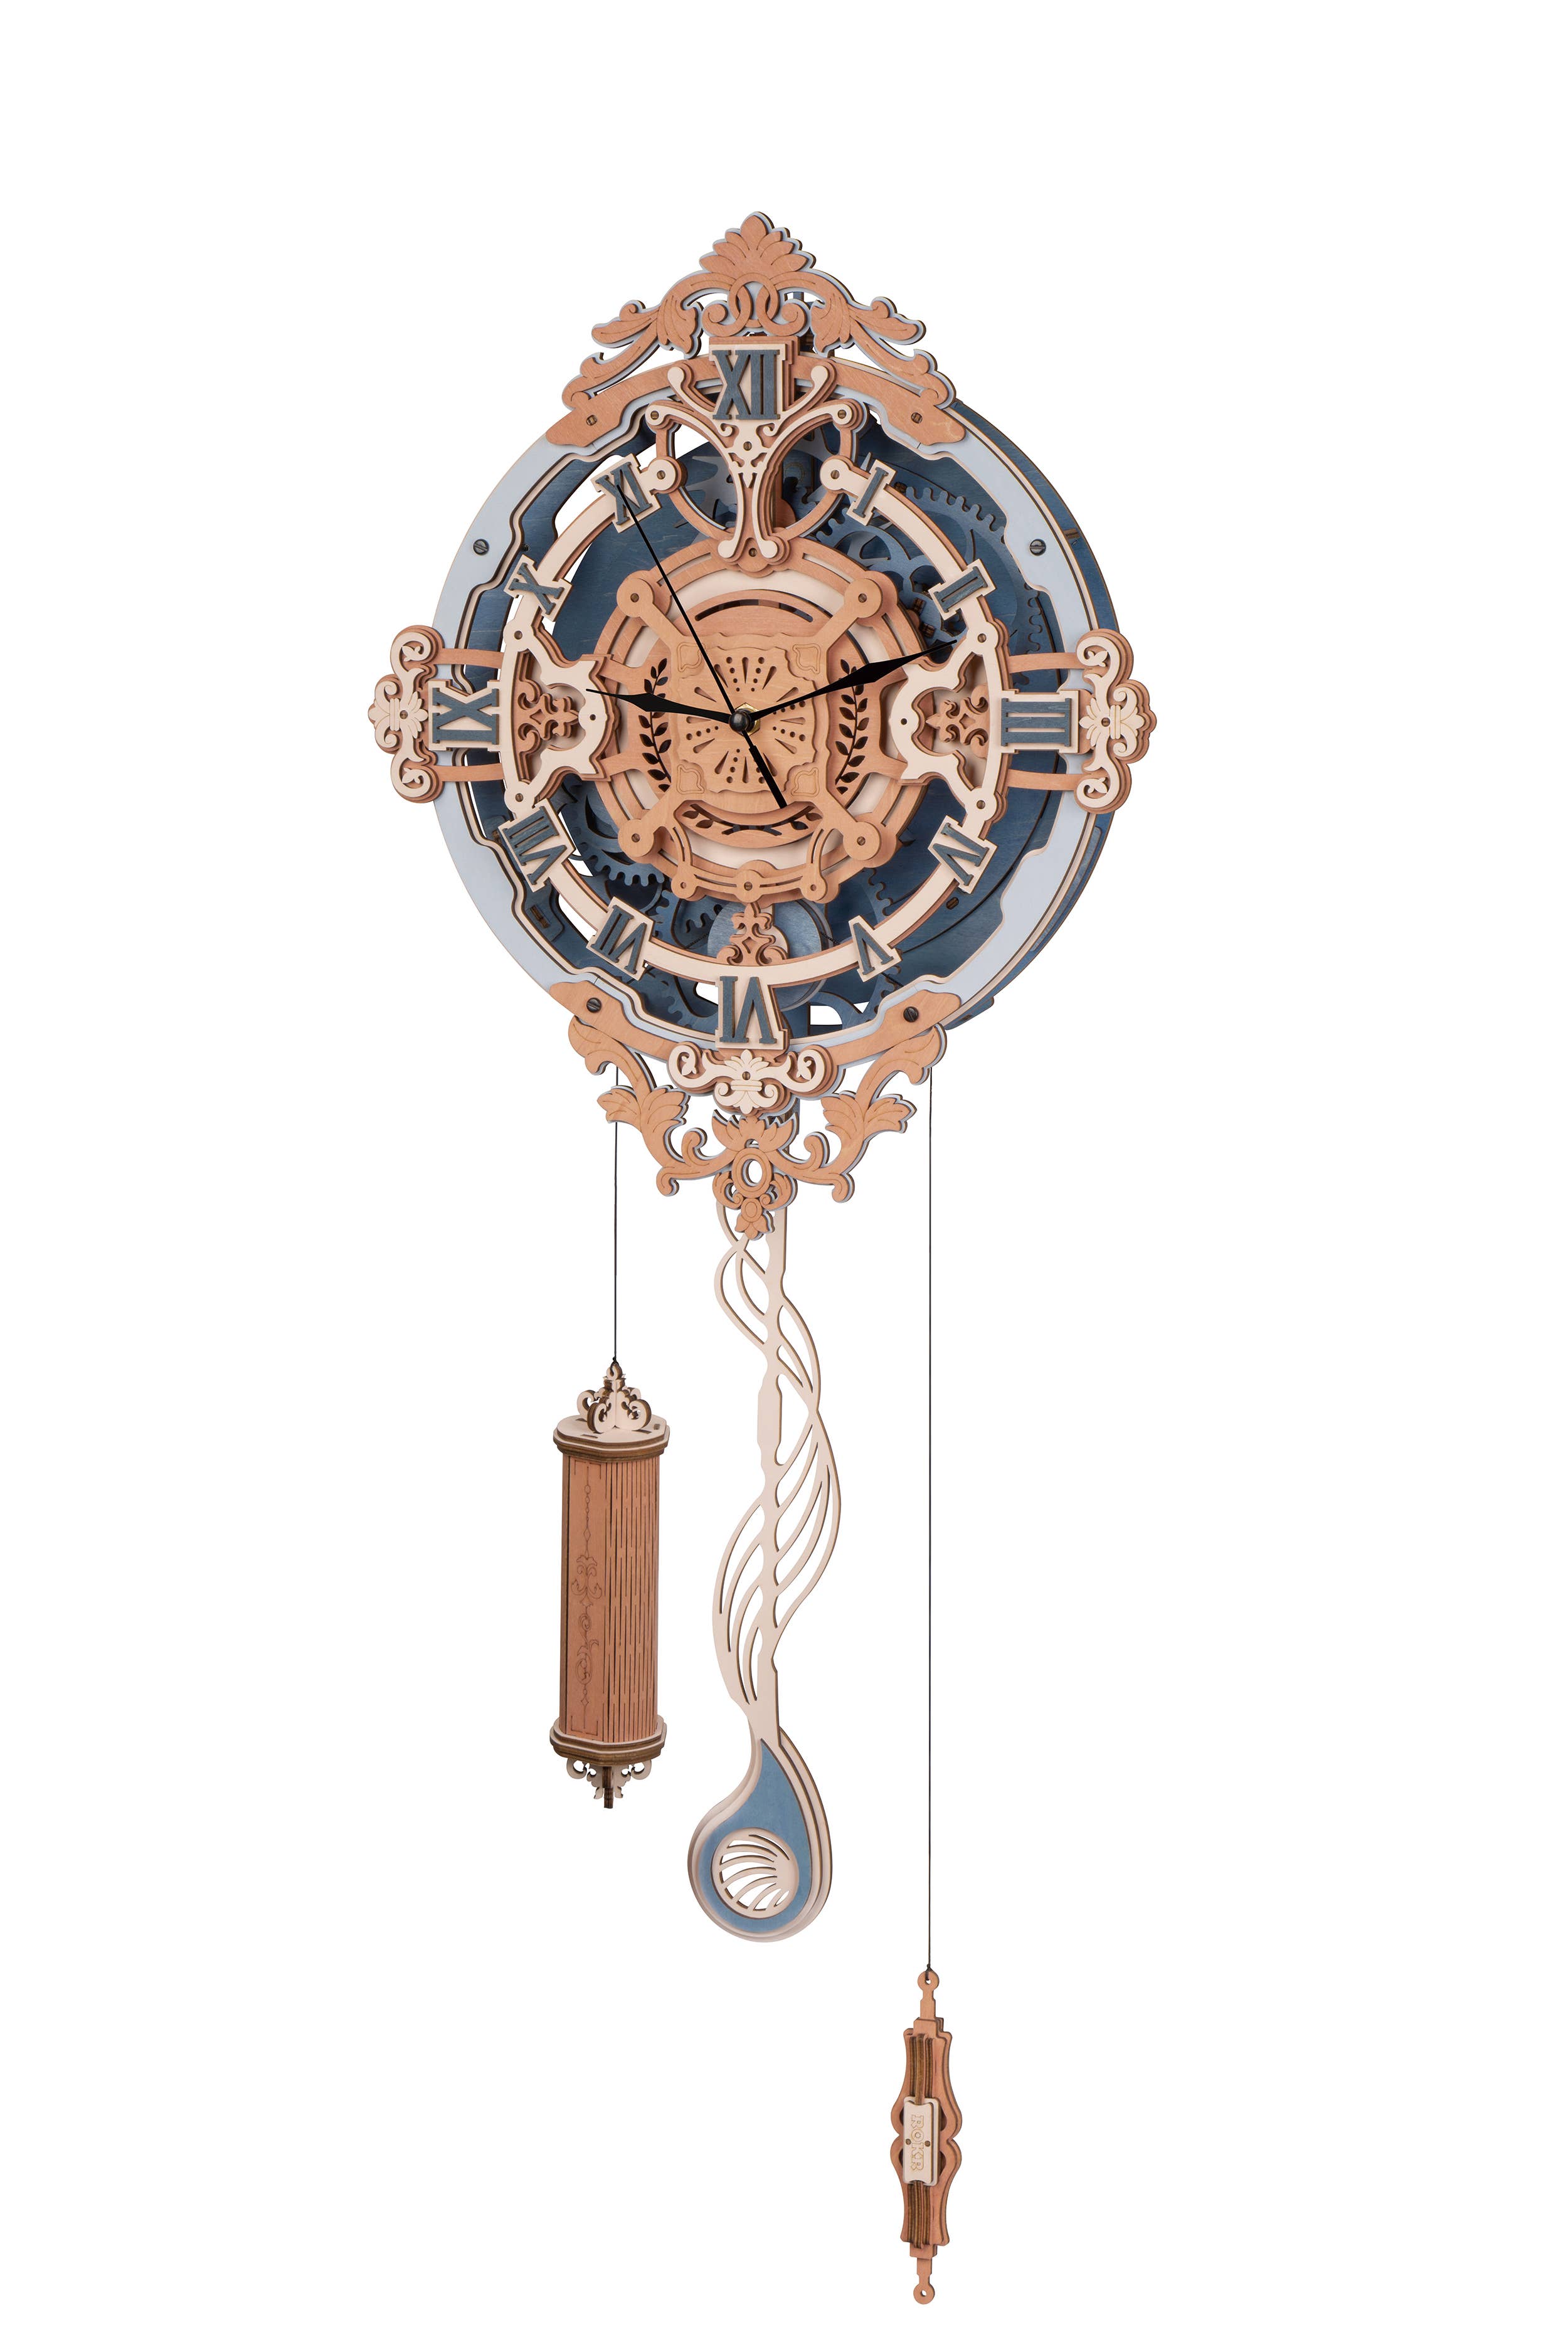 Romantic Notes Wall Clock Wooden Mechanical Puzzle